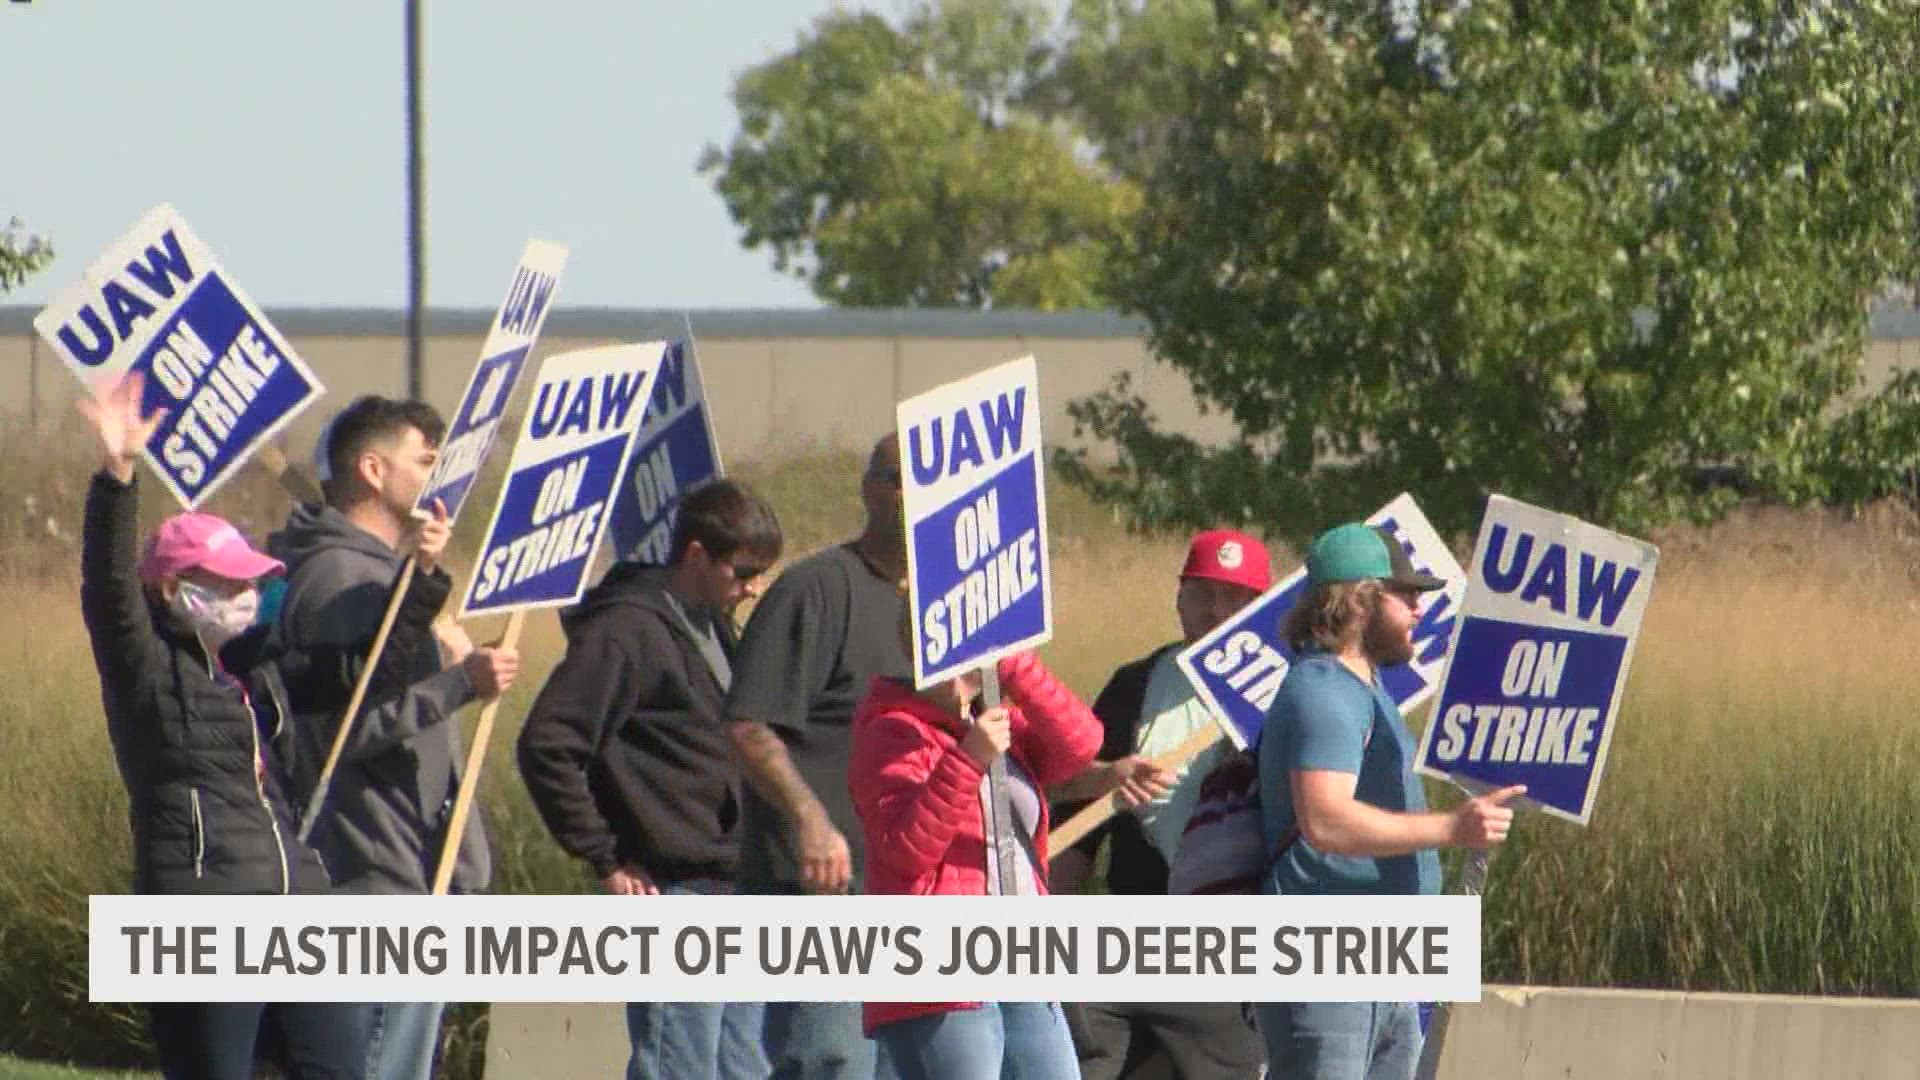 The strike is significant for three reasons: John Deere is a Fortune 500 company, it employs more than 10,000 workers and this was the first strike in 35 years.